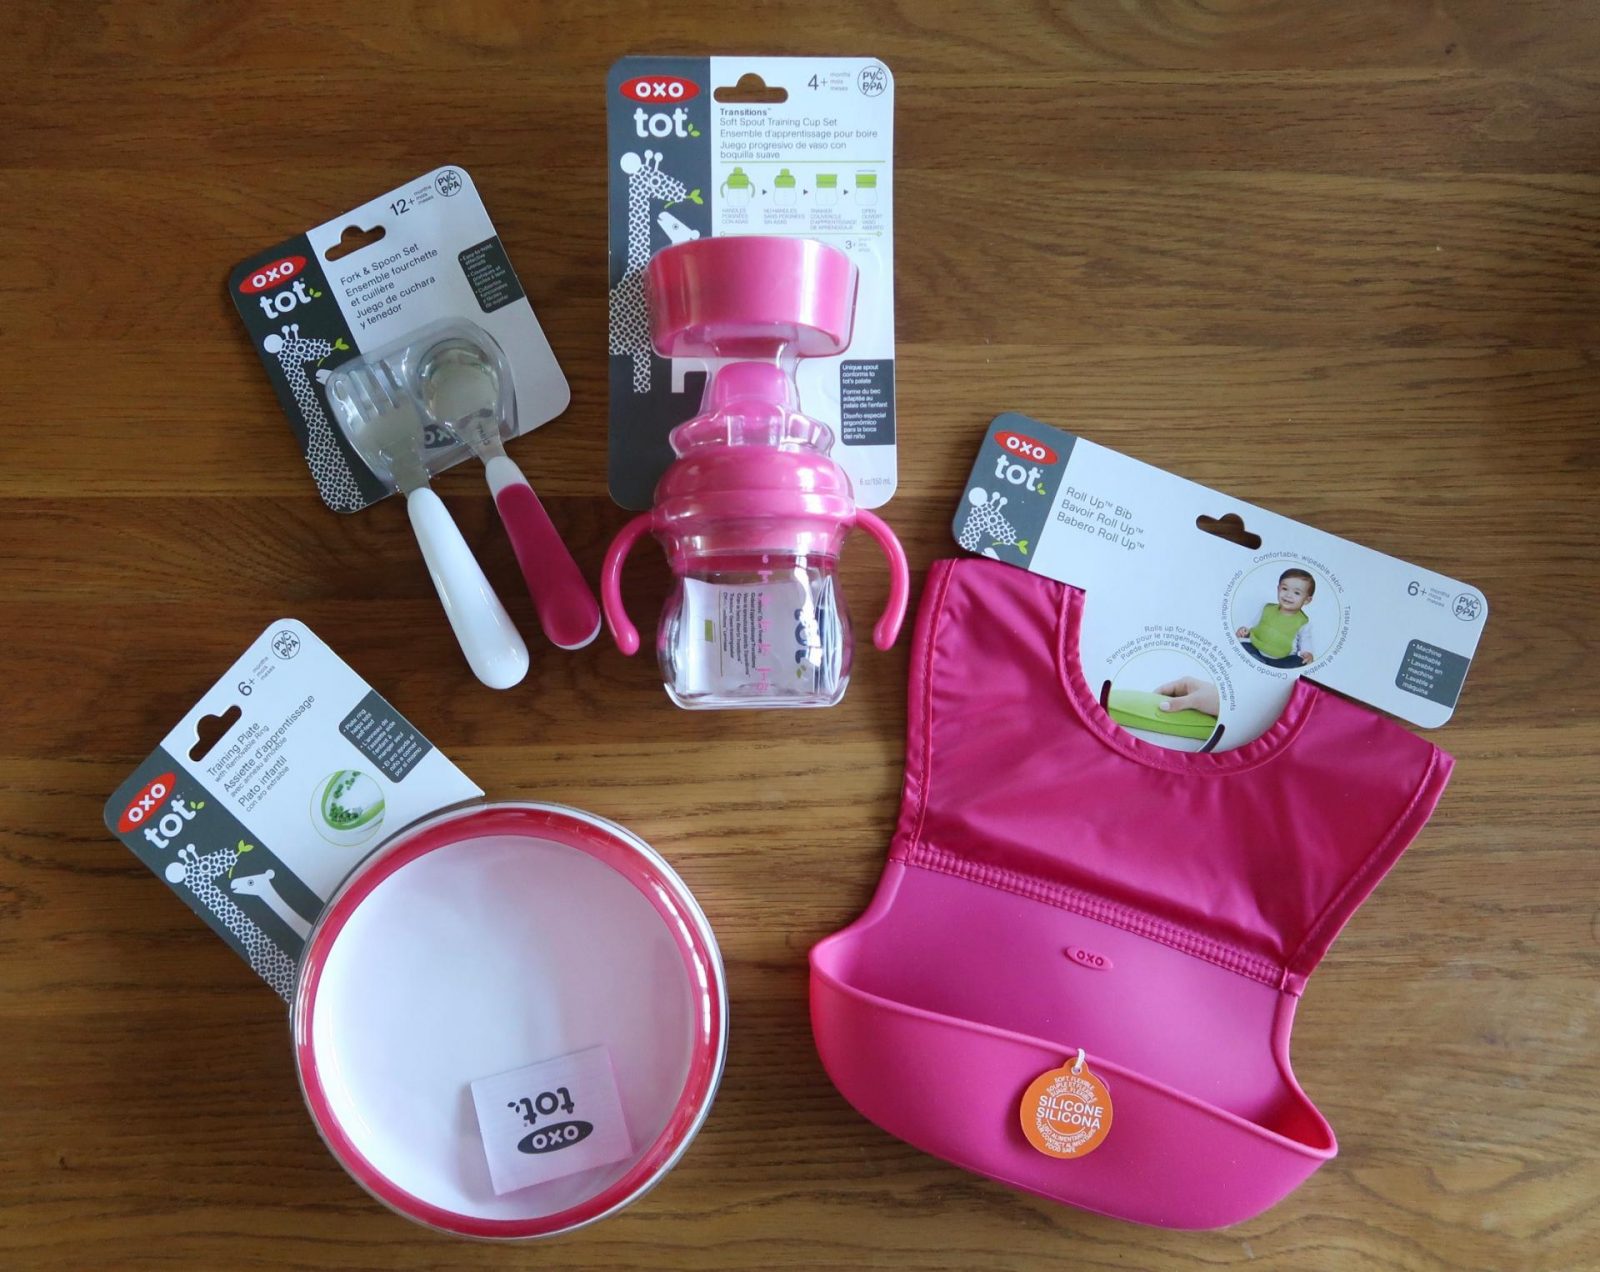 oxo tot weaning products